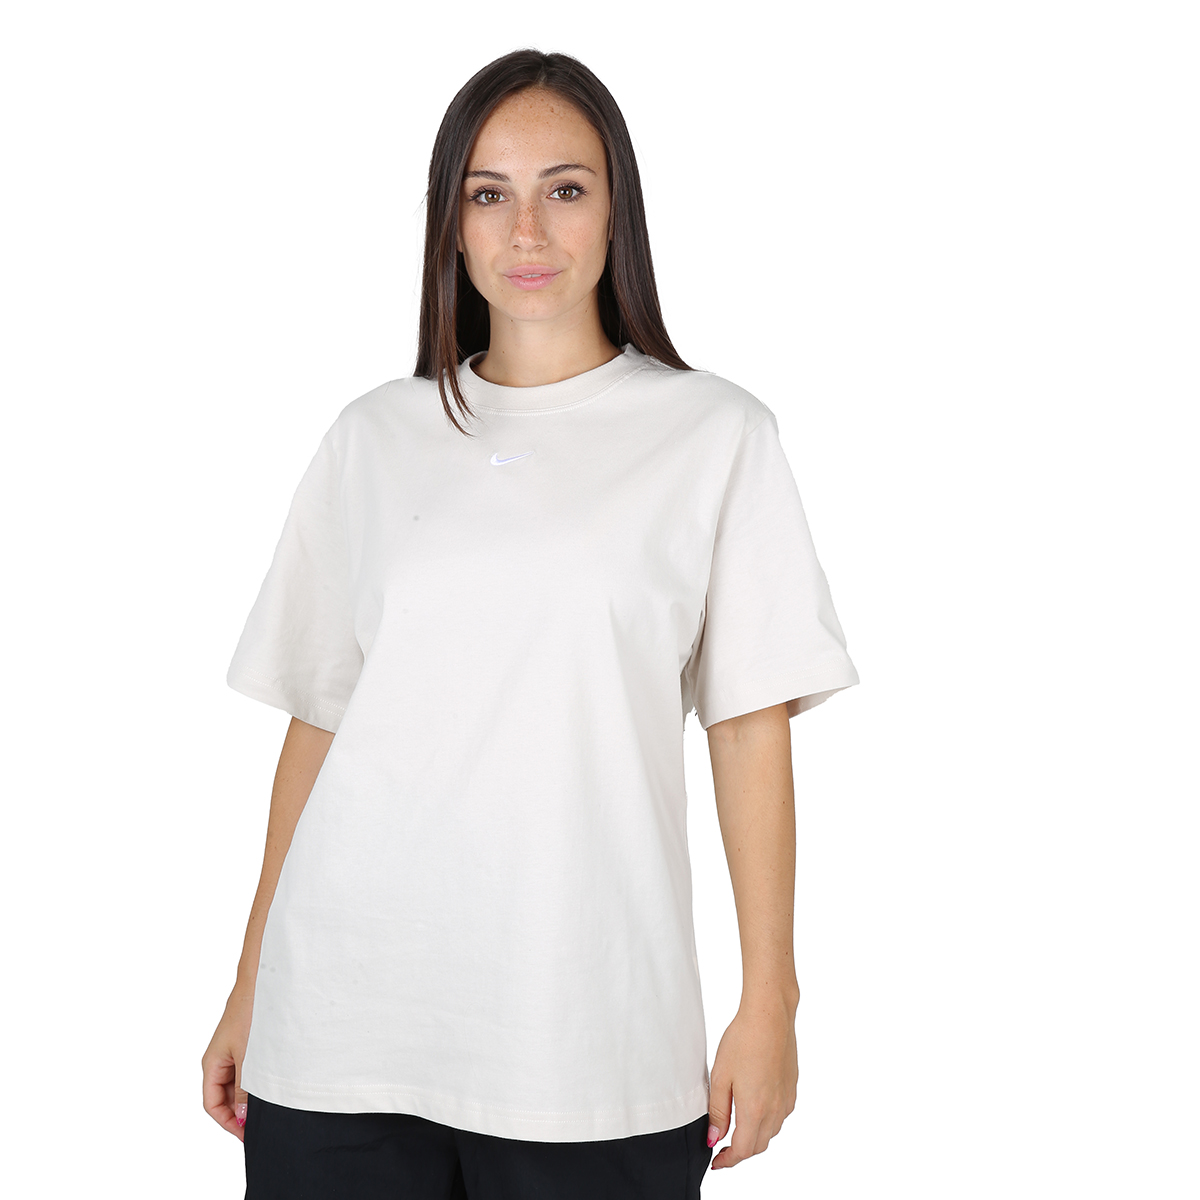 Remera Nike Essentials Bf Lbr Mujer,  image number null